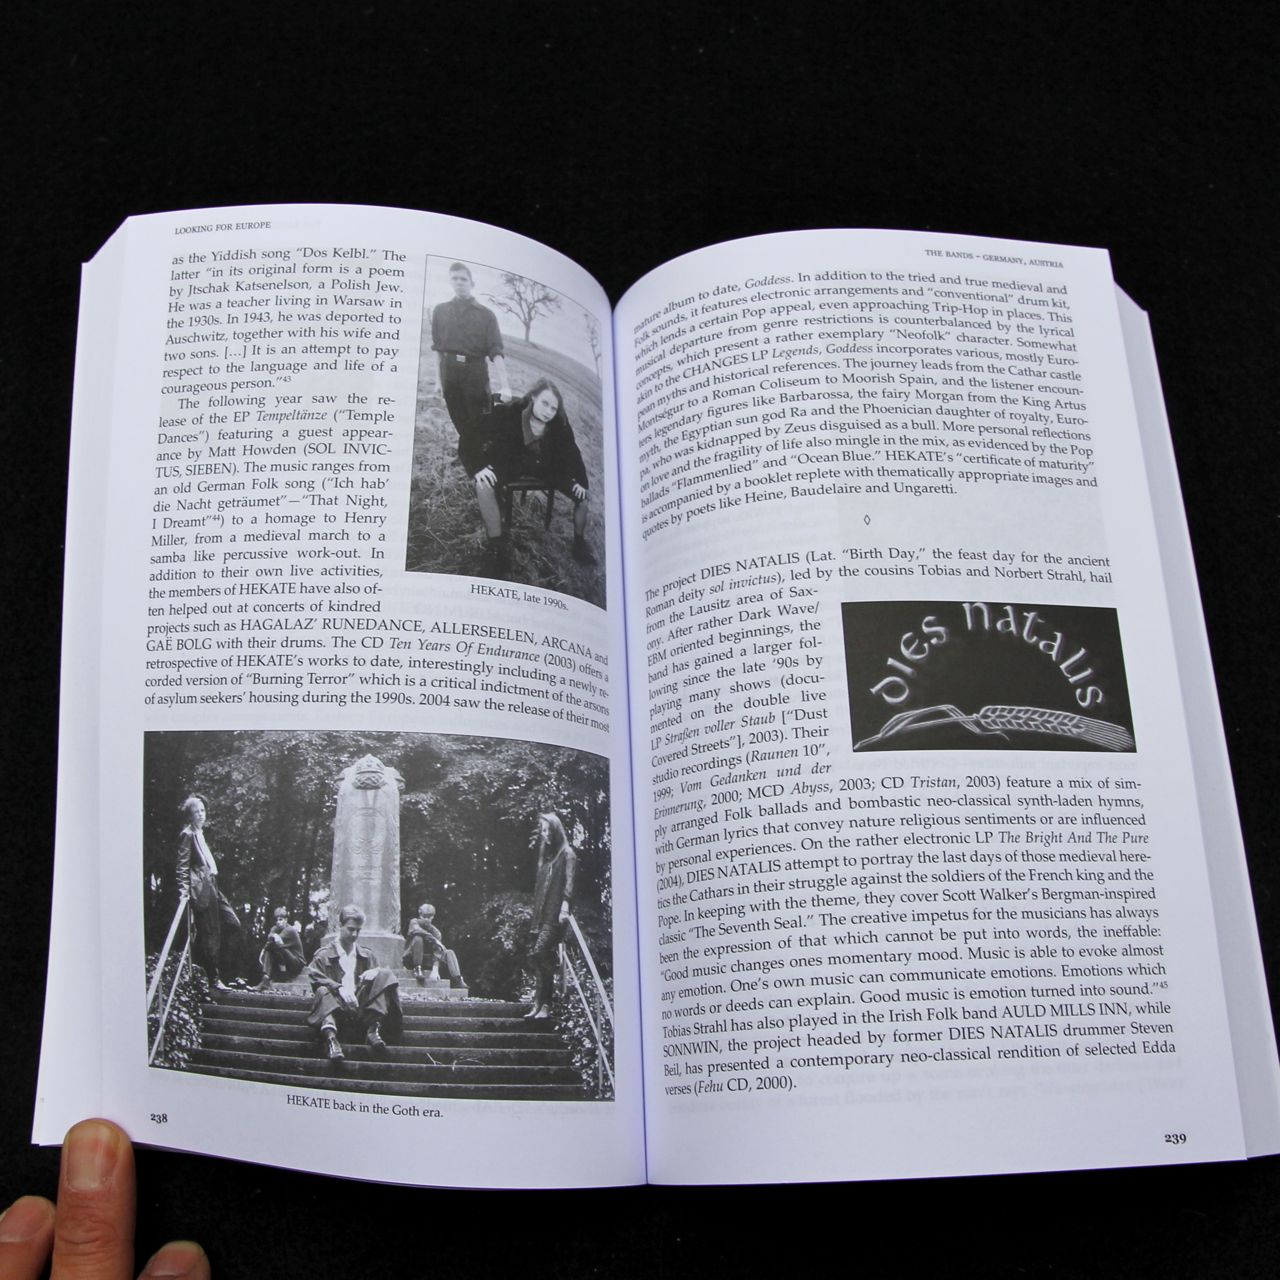 ANDREAS DIESEL, DIETER GERTEN (Authors) - Looking For Europe: The History Of Neofolk - BOOK - 11742